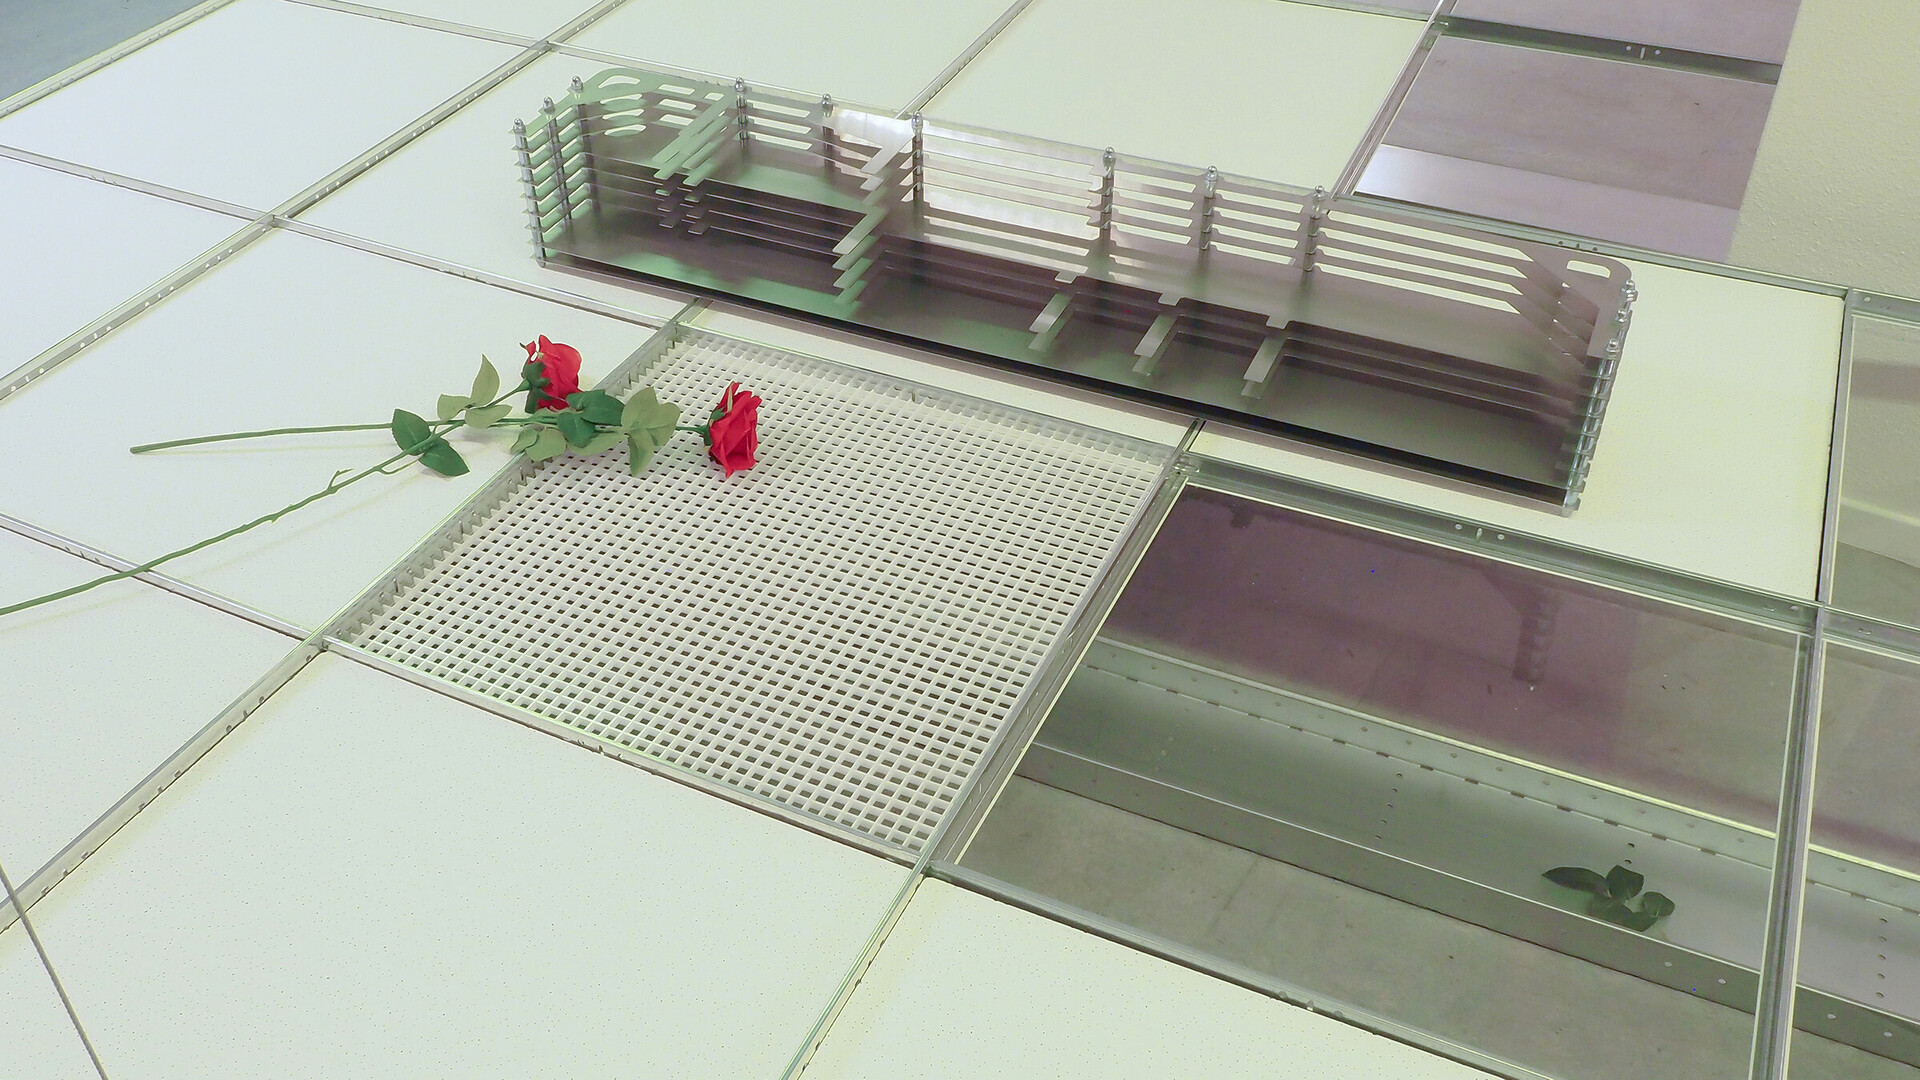 Tom Putman, detail, 2020, dropped ceiling, perspex, stainless steel, fake roses